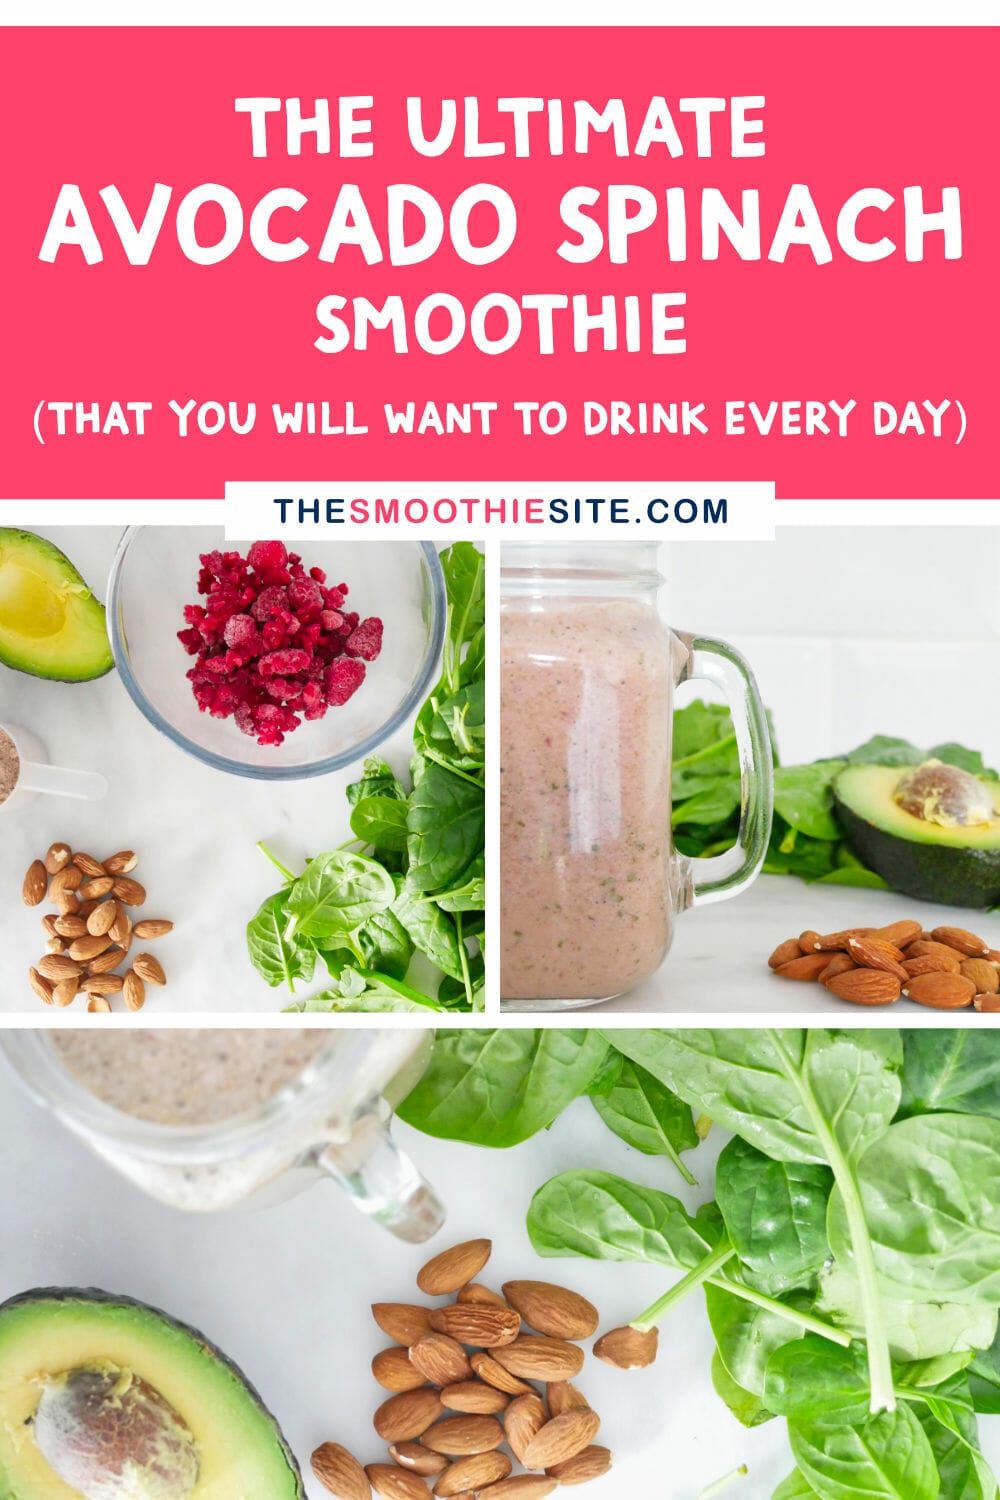 Avocado spinach smoothie with raspberries and protein (Keto Friendly!) via @thesmoothiesite